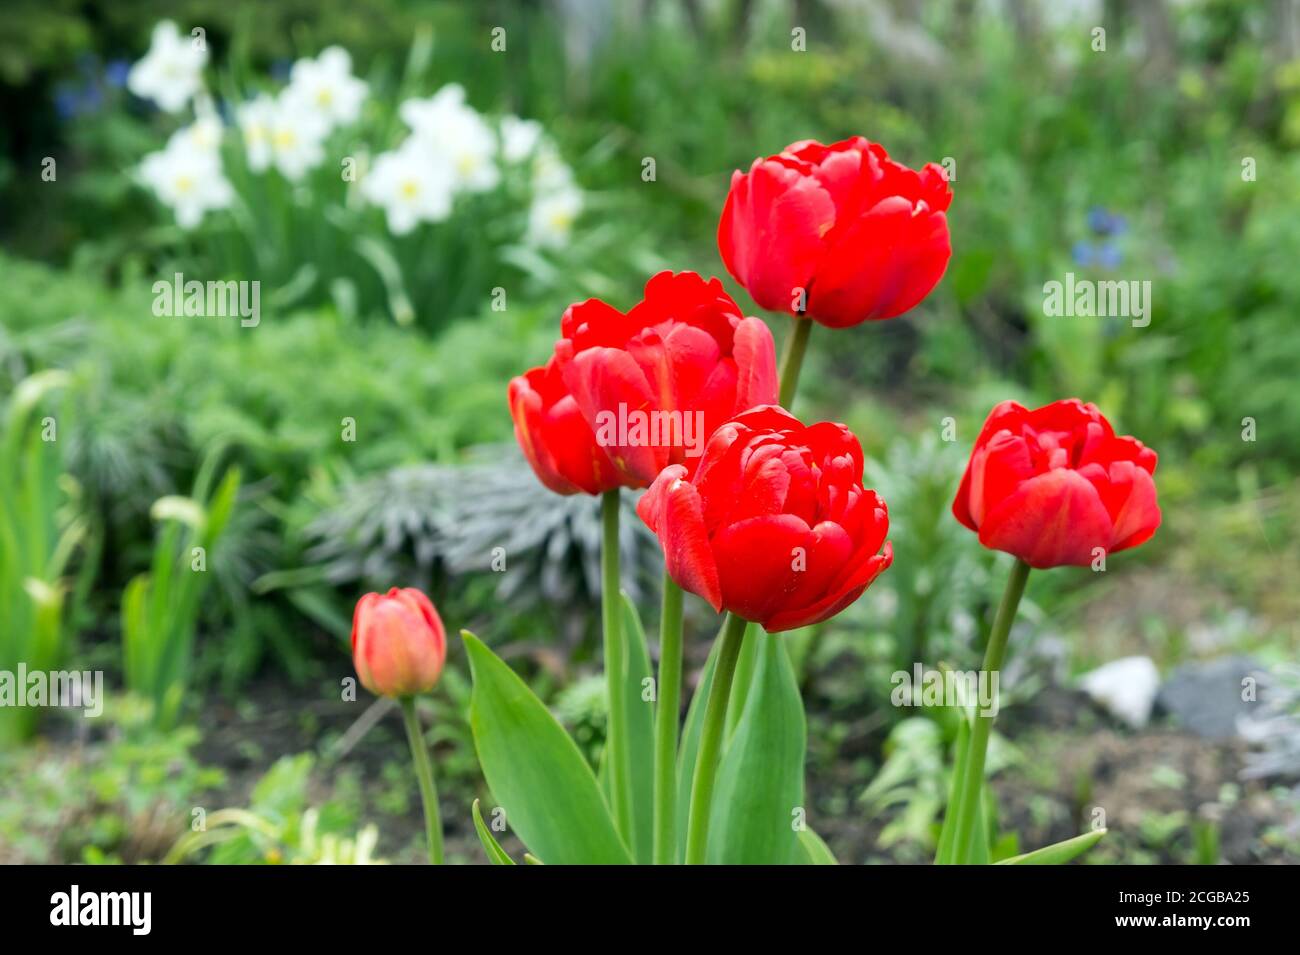 A group of red tulips in bloom in the spring garden on the background of white daffodils. Stock Photo